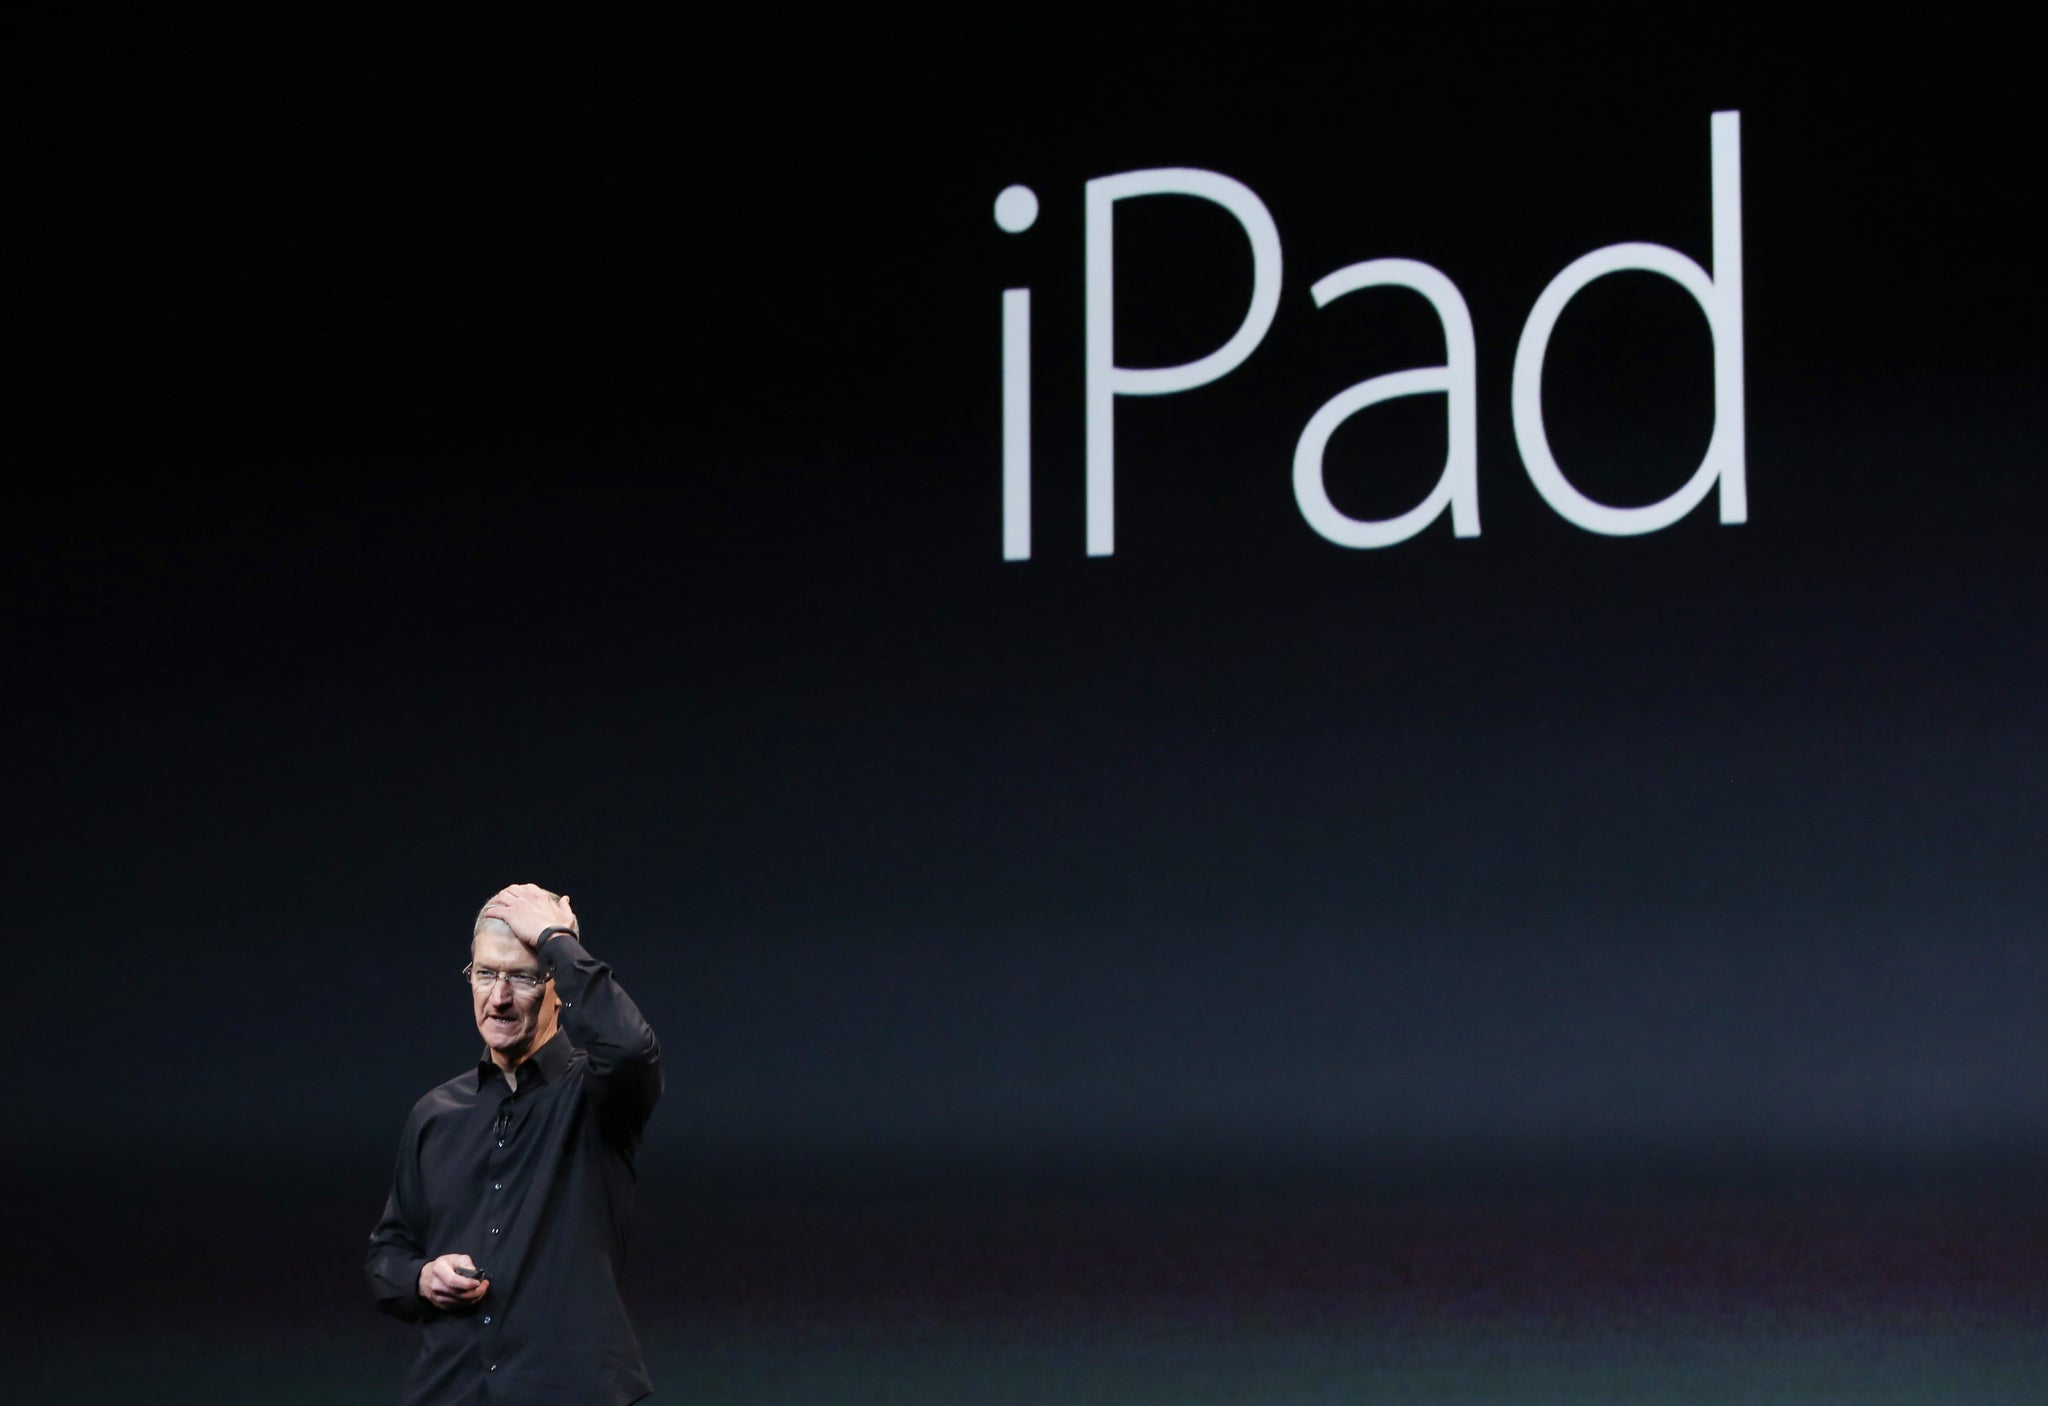 Apple Inc CEO Tim Cook, seen here introducing an iPad on 22 October 2013, is expected to unveil the firm's latest iPad offerings